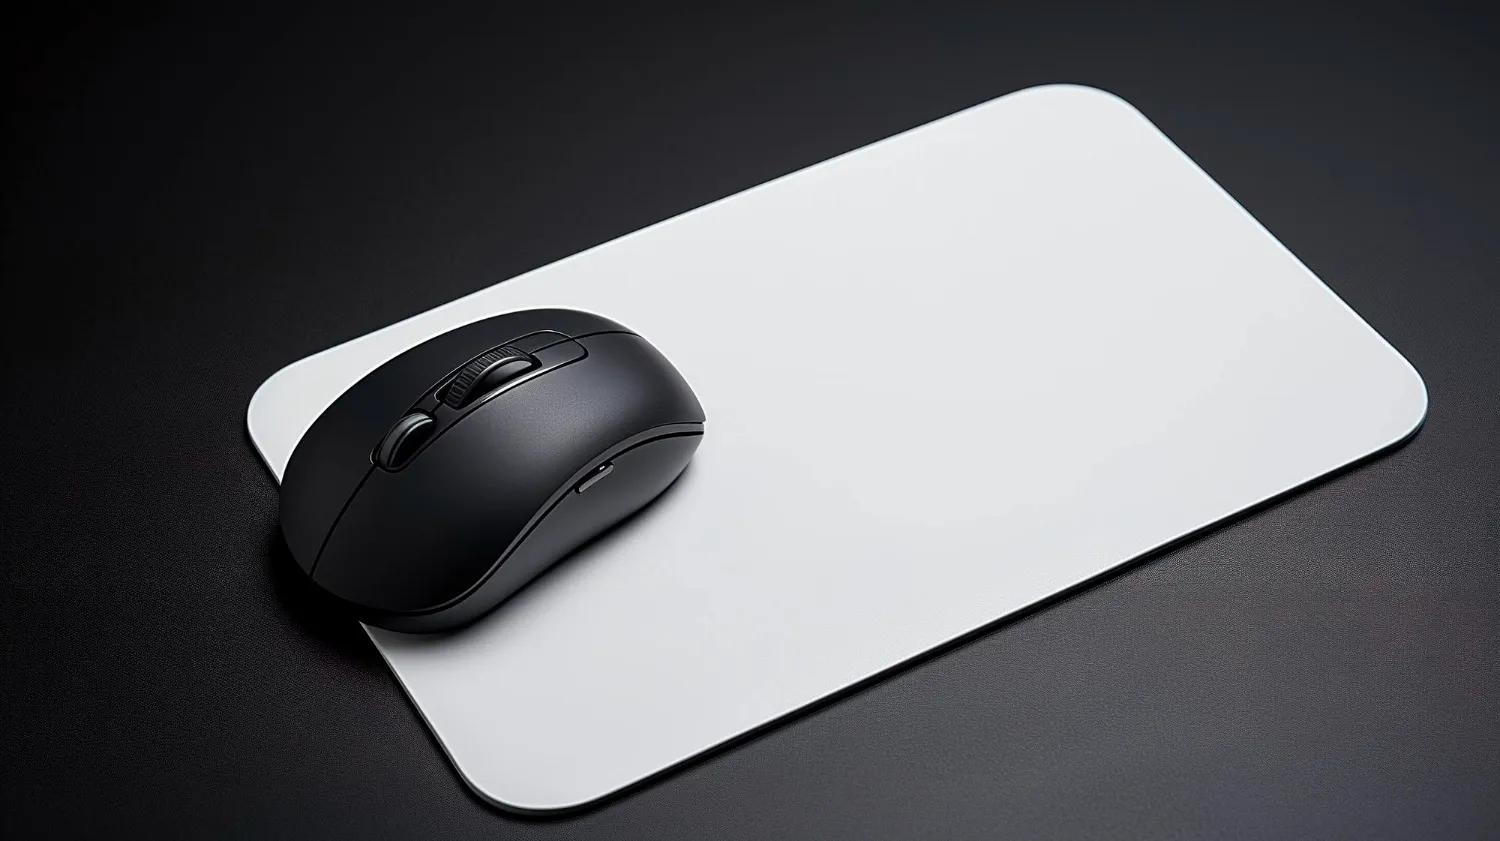 A Photo showcasing the simplicity and elegance of a wired or wireless computer mouse pad